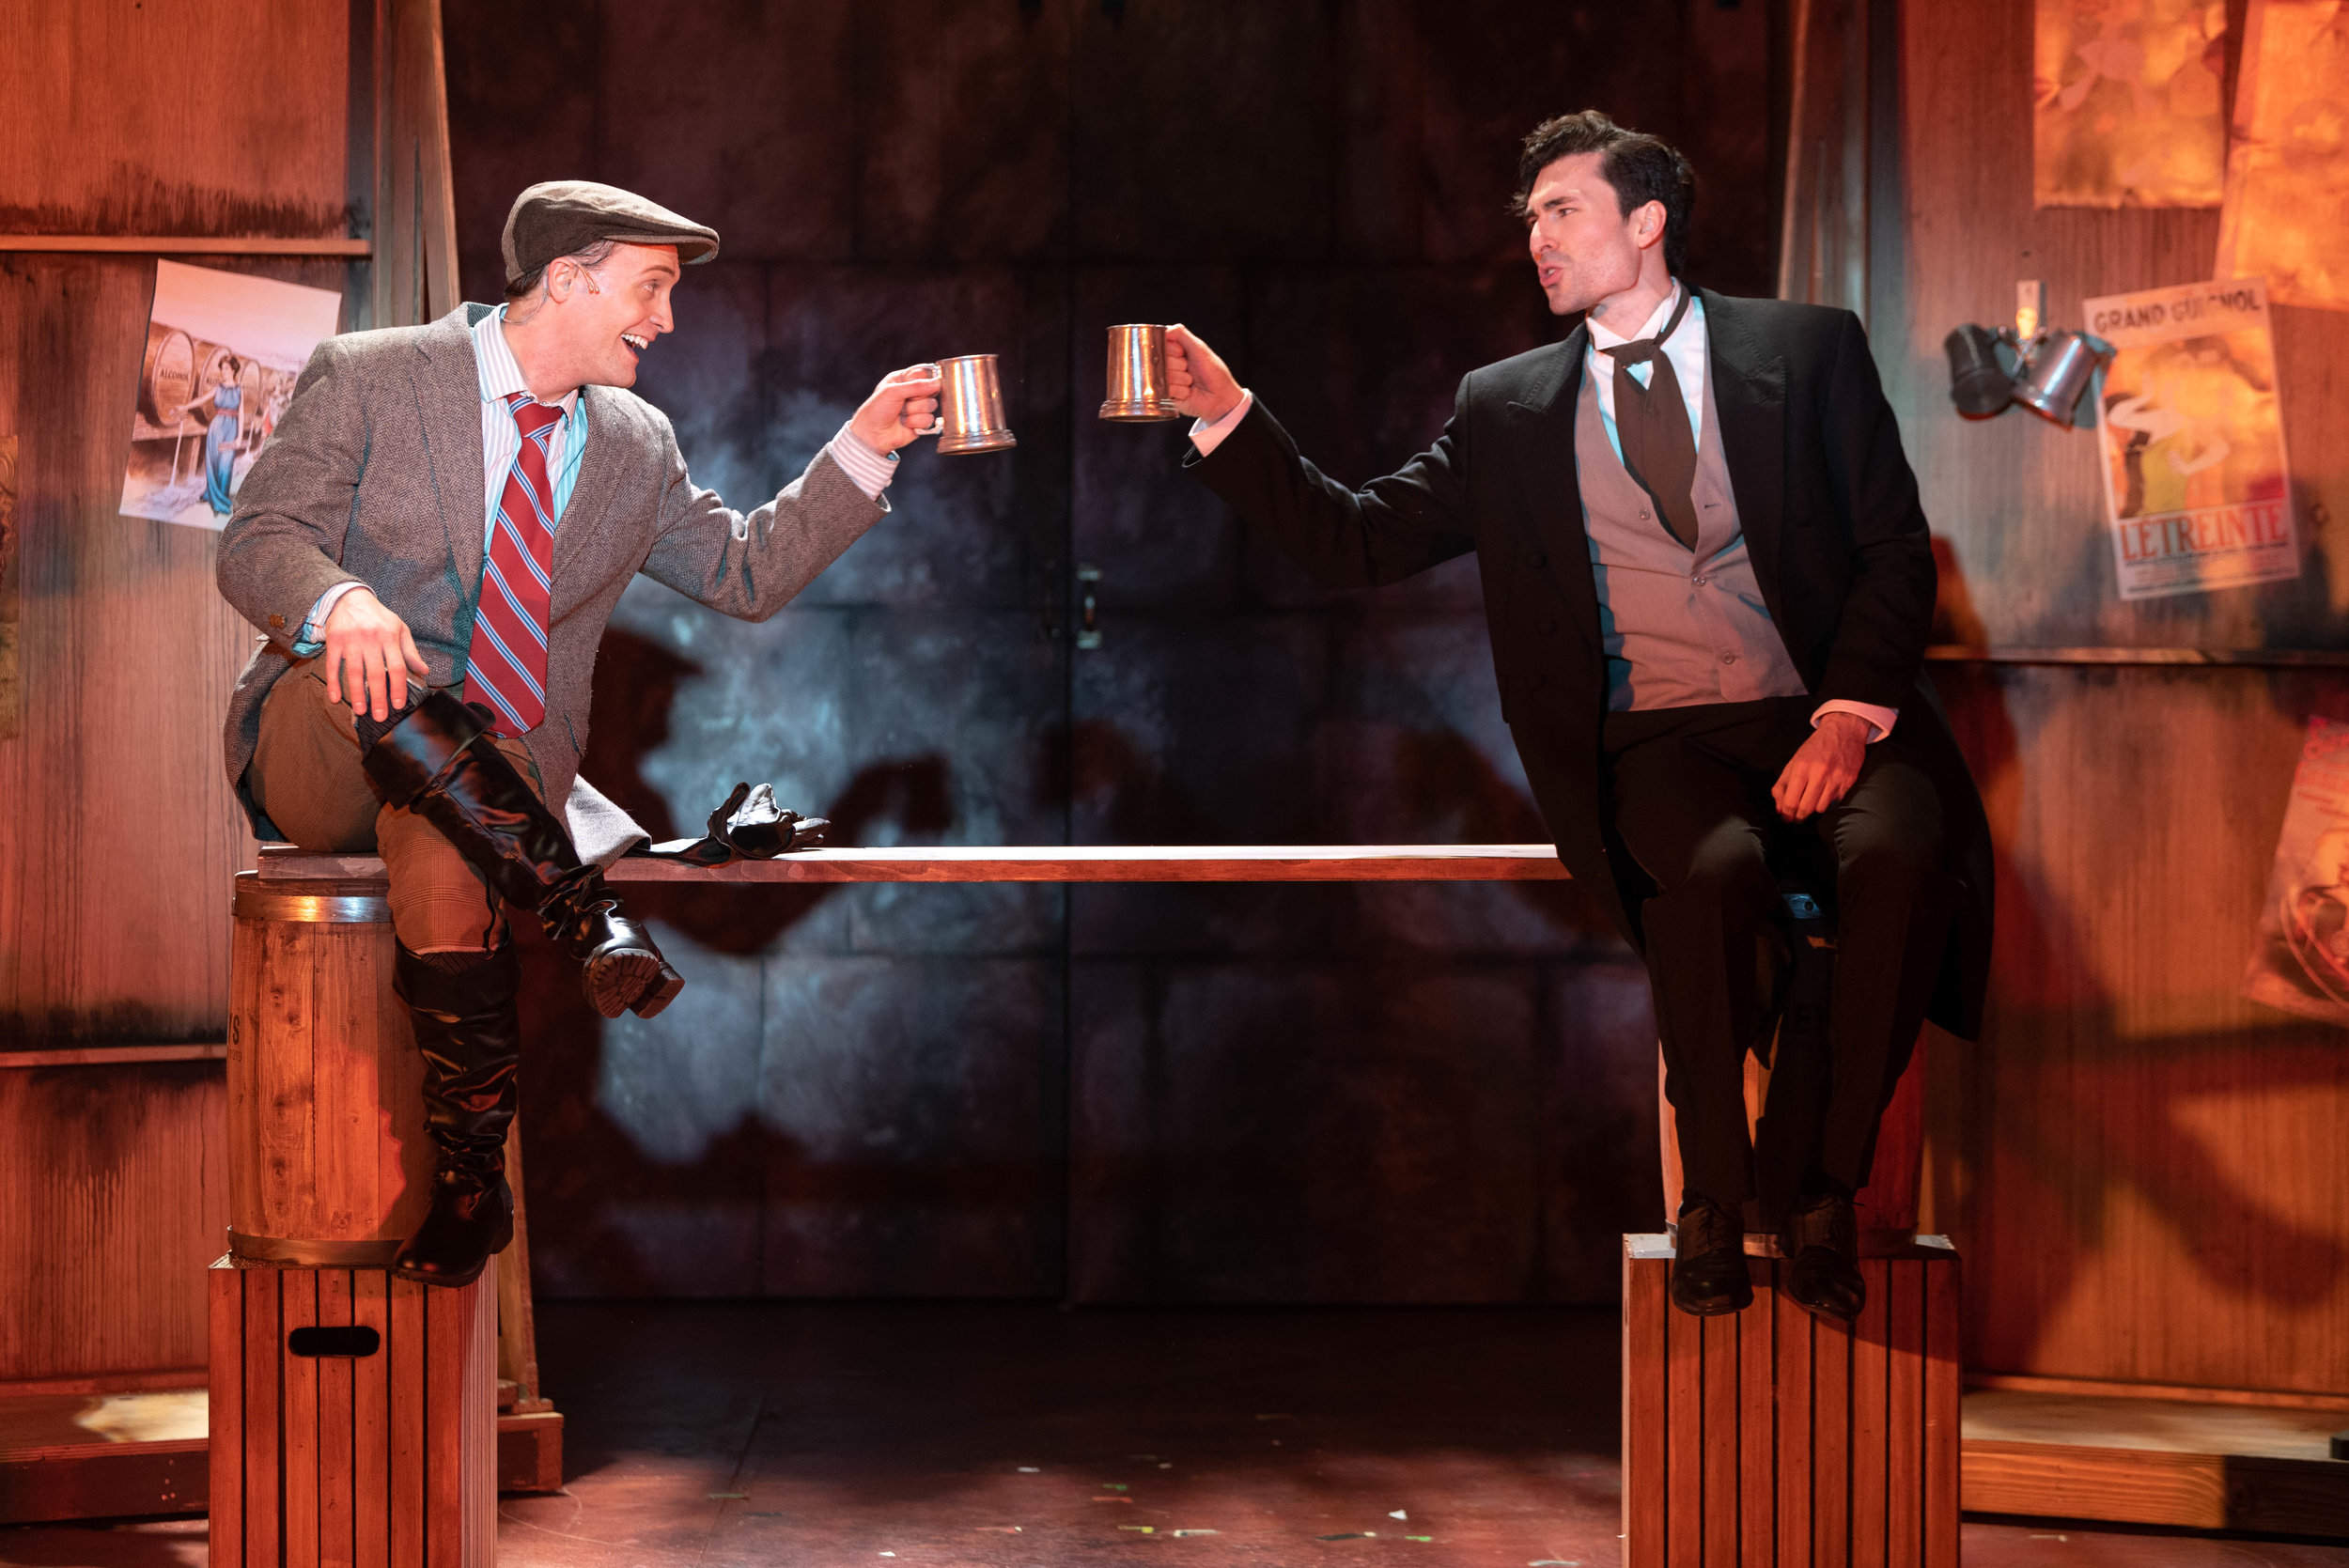  Henry D’Ysquith (Danny Gardner) and Monty (Sean Yves Lessard) share a drink and agree it is “Better With a Man”. 